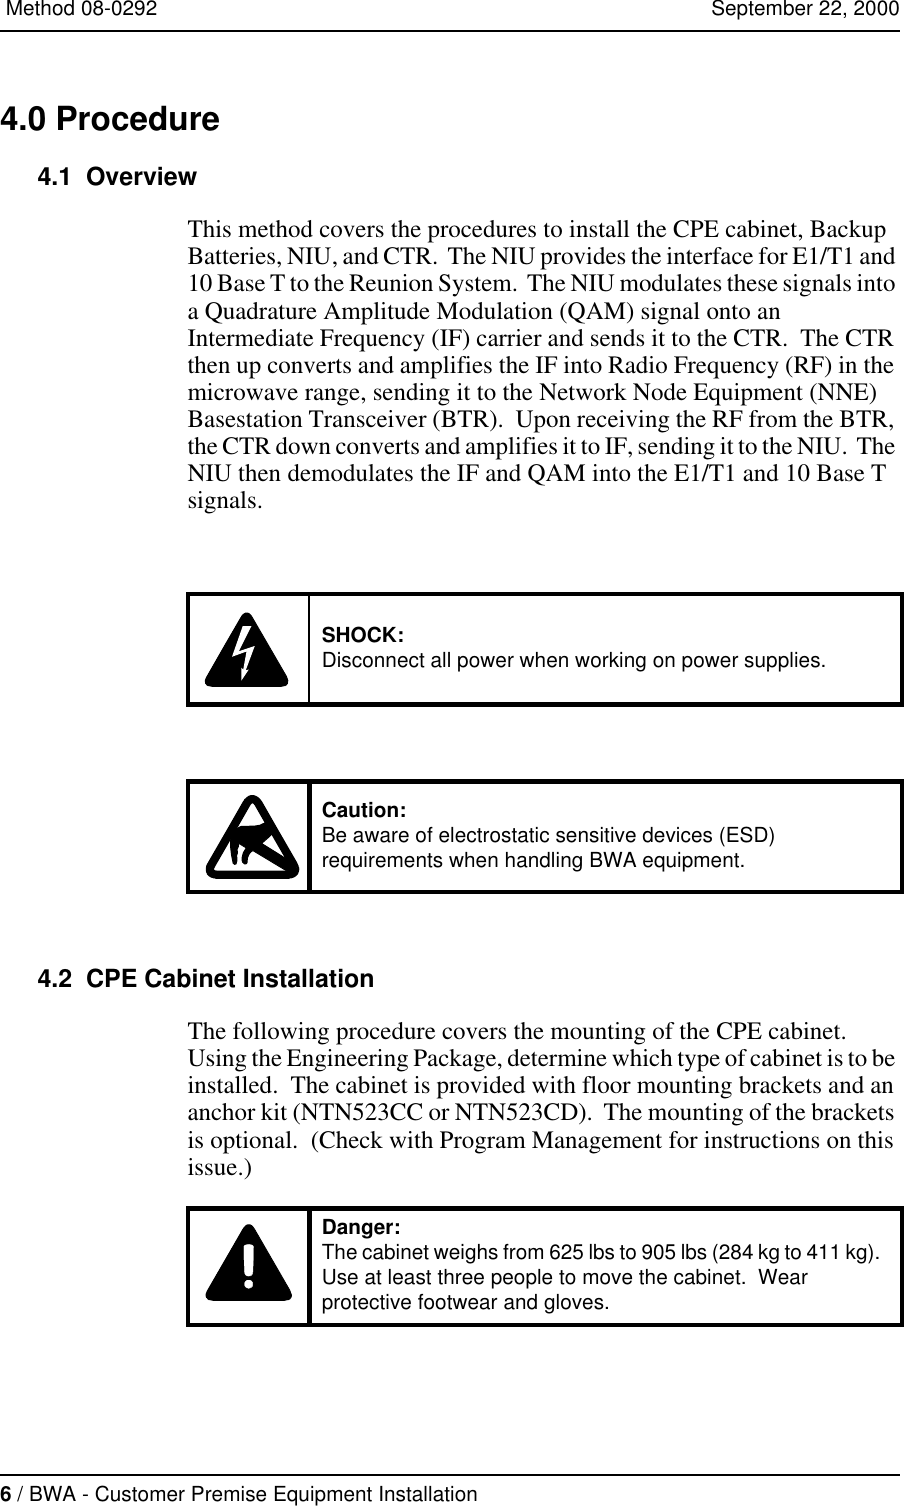 6 / BWA - Customer Premise Equipment Installation   Method 08-0292   September 22, 20004.0 Procedure4.1  OverviewThis method covers the procedures to install the CPE cabinet, Backup Batteries, NIU, and CTR.  The NIU provides the interface for E1/T1 and 10 Base T to the Reunion System.  The NIU modulates these signals into a Quadrature Amplitude Modulation (QAM) signal onto an Intermediate Frequency (IF) carrier and sends it to the CTR.  The CTR then up converts and amplifies the IF into Radio Frequency (RF) in the microwave range, sending it to the Network Node Equipment (NNE) Basestation Transceiver (BTR).  Upon receiving the RF from the BTR, the CTR down converts and amplifies it to IF, sending it to the NIU.  The NIU then demodulates the IF and QAM into the E1/T1 and 10 Base T signals.4.2  CPE Cabinet InstallationThe following procedure covers the mounting of the CPE cabinet.  Using the Engineering Package, determine which type of cabinet is to be installed.  The cabinet is provided with floor mounting brackets and an anchor kit (NTN523CC or NTN523CD).  The mounting of the brackets is optional.  (Check with Program Management for instructions on this issue.)  SHOCK:Disconnect all power when working on power supplies.Caution:Be aware of electrostatic sensitive devices (ESD) requirements when handling BWA equipment.Danger:The cabinet weighs from 625 lbs to 905 lbs (284 kg to 411 kg).  Use at least three people to move the cabinet.  Wear protective footwear and gloves.